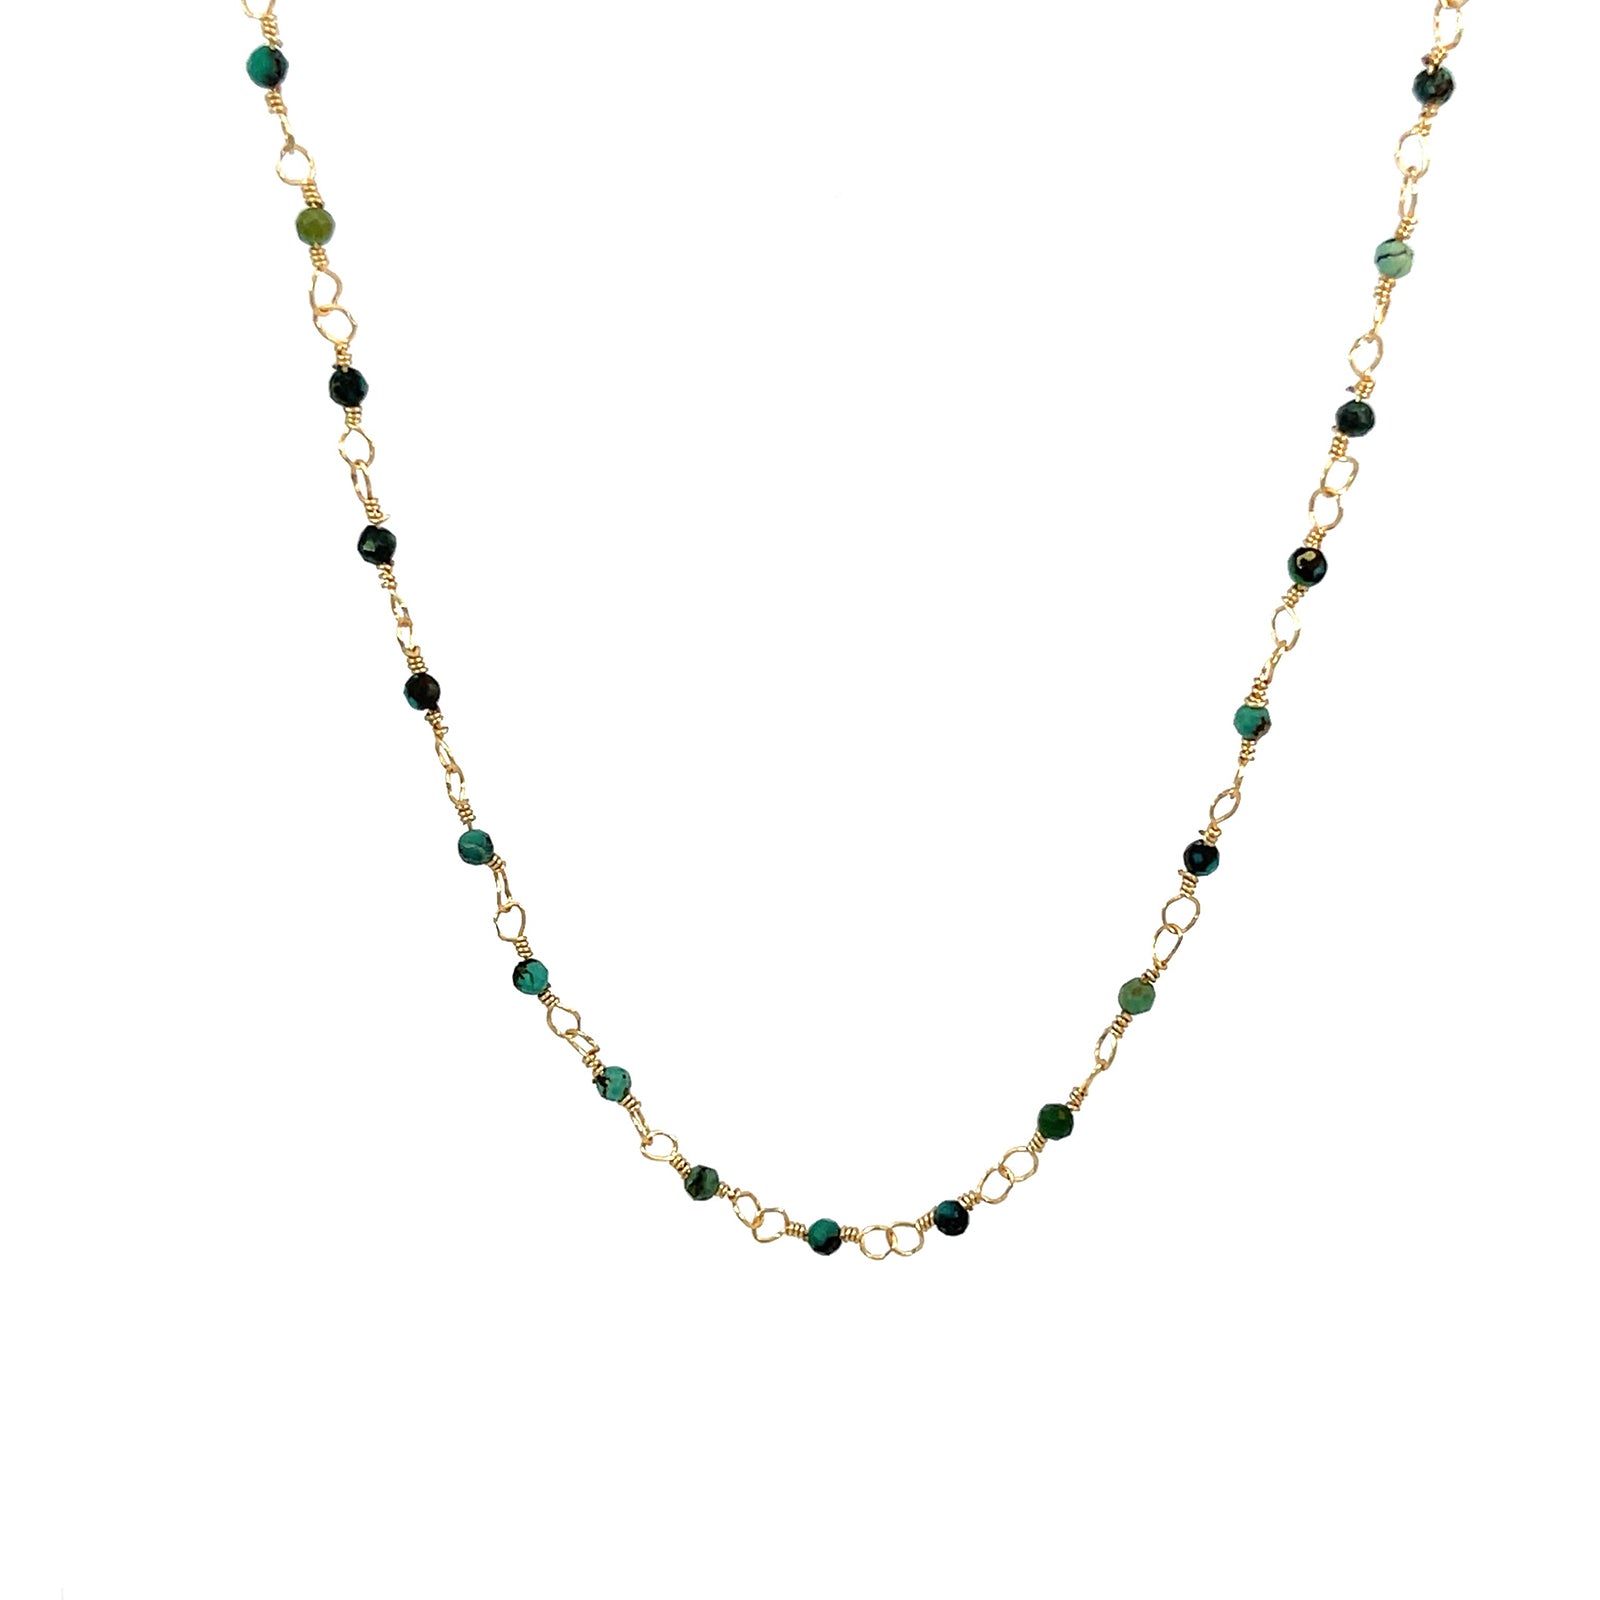 Find Your Perfect Chiyo Beaded Necklaces Here